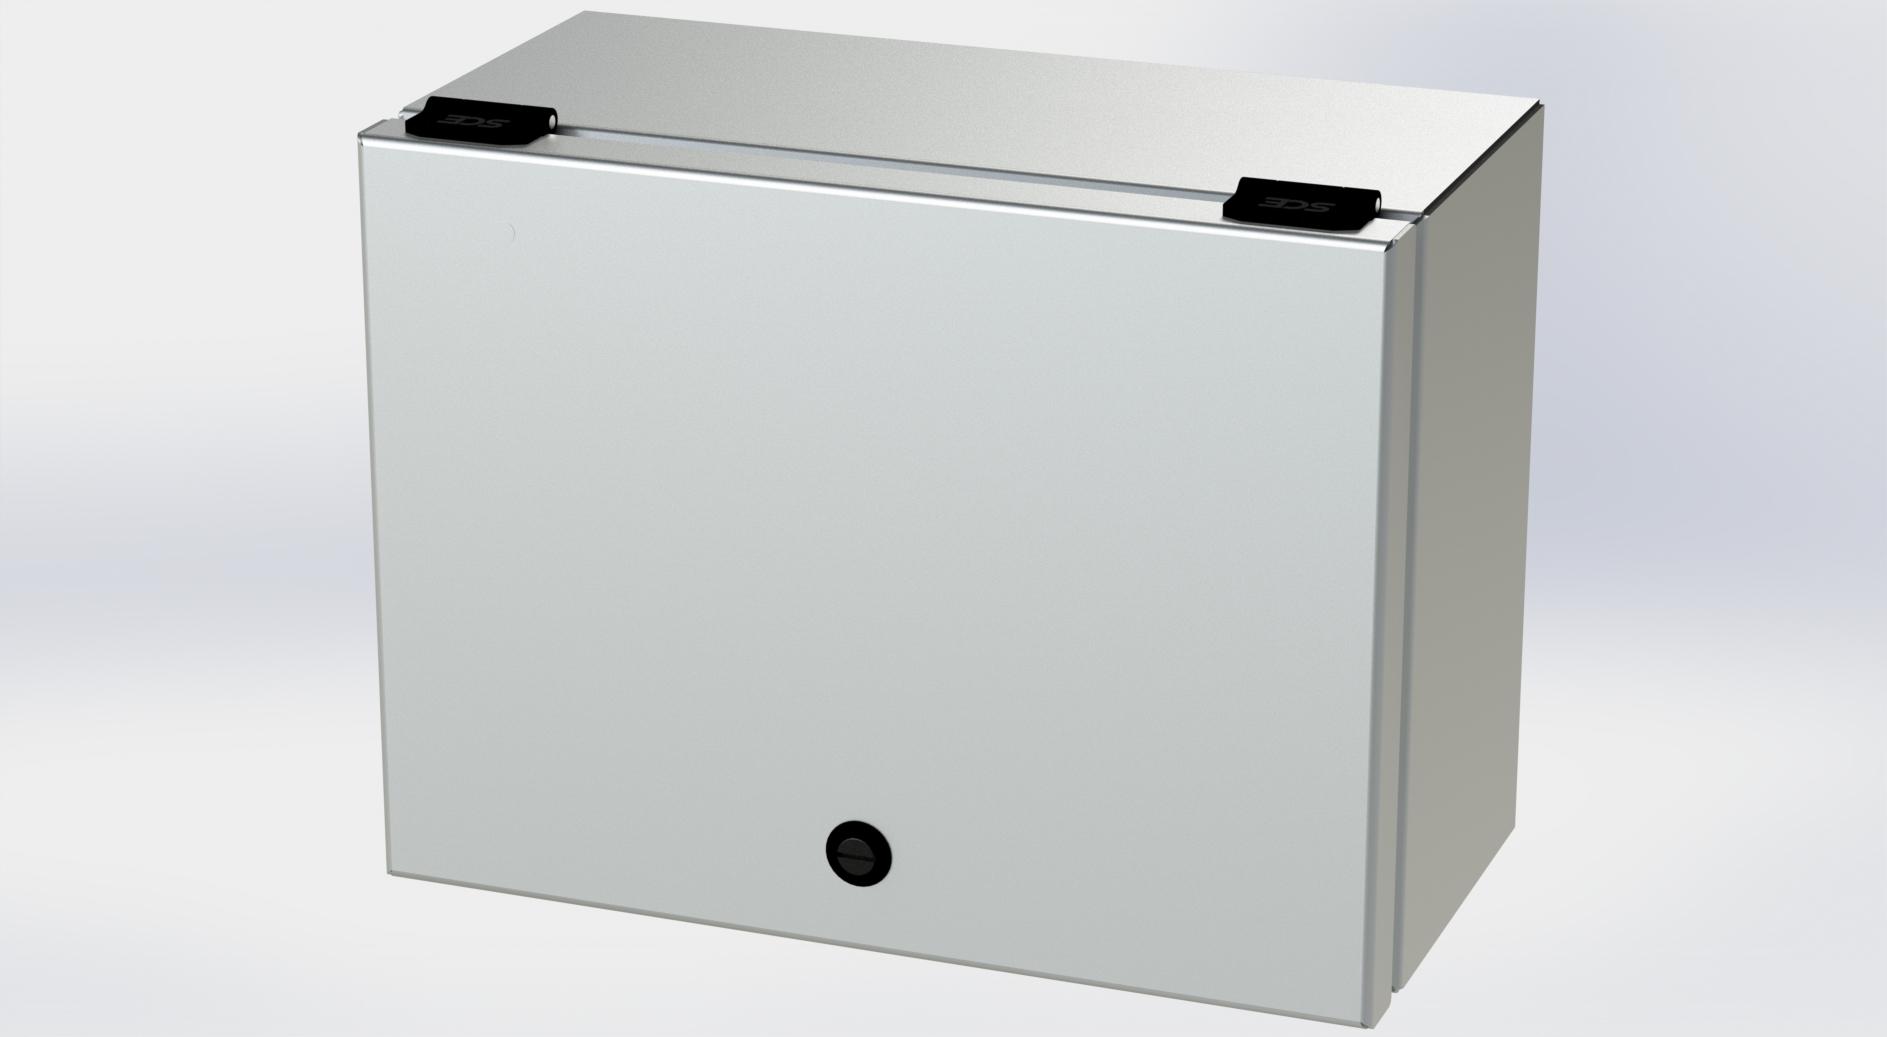 Saginaw Control SCE-L9126ELJSS S.S. ELJ Trough Enclosure, Height:9.00", Width:12.00", Depth:6.00", #4 brushed finish on all exterior surfaces. Optional sub-panels are powder coated white.